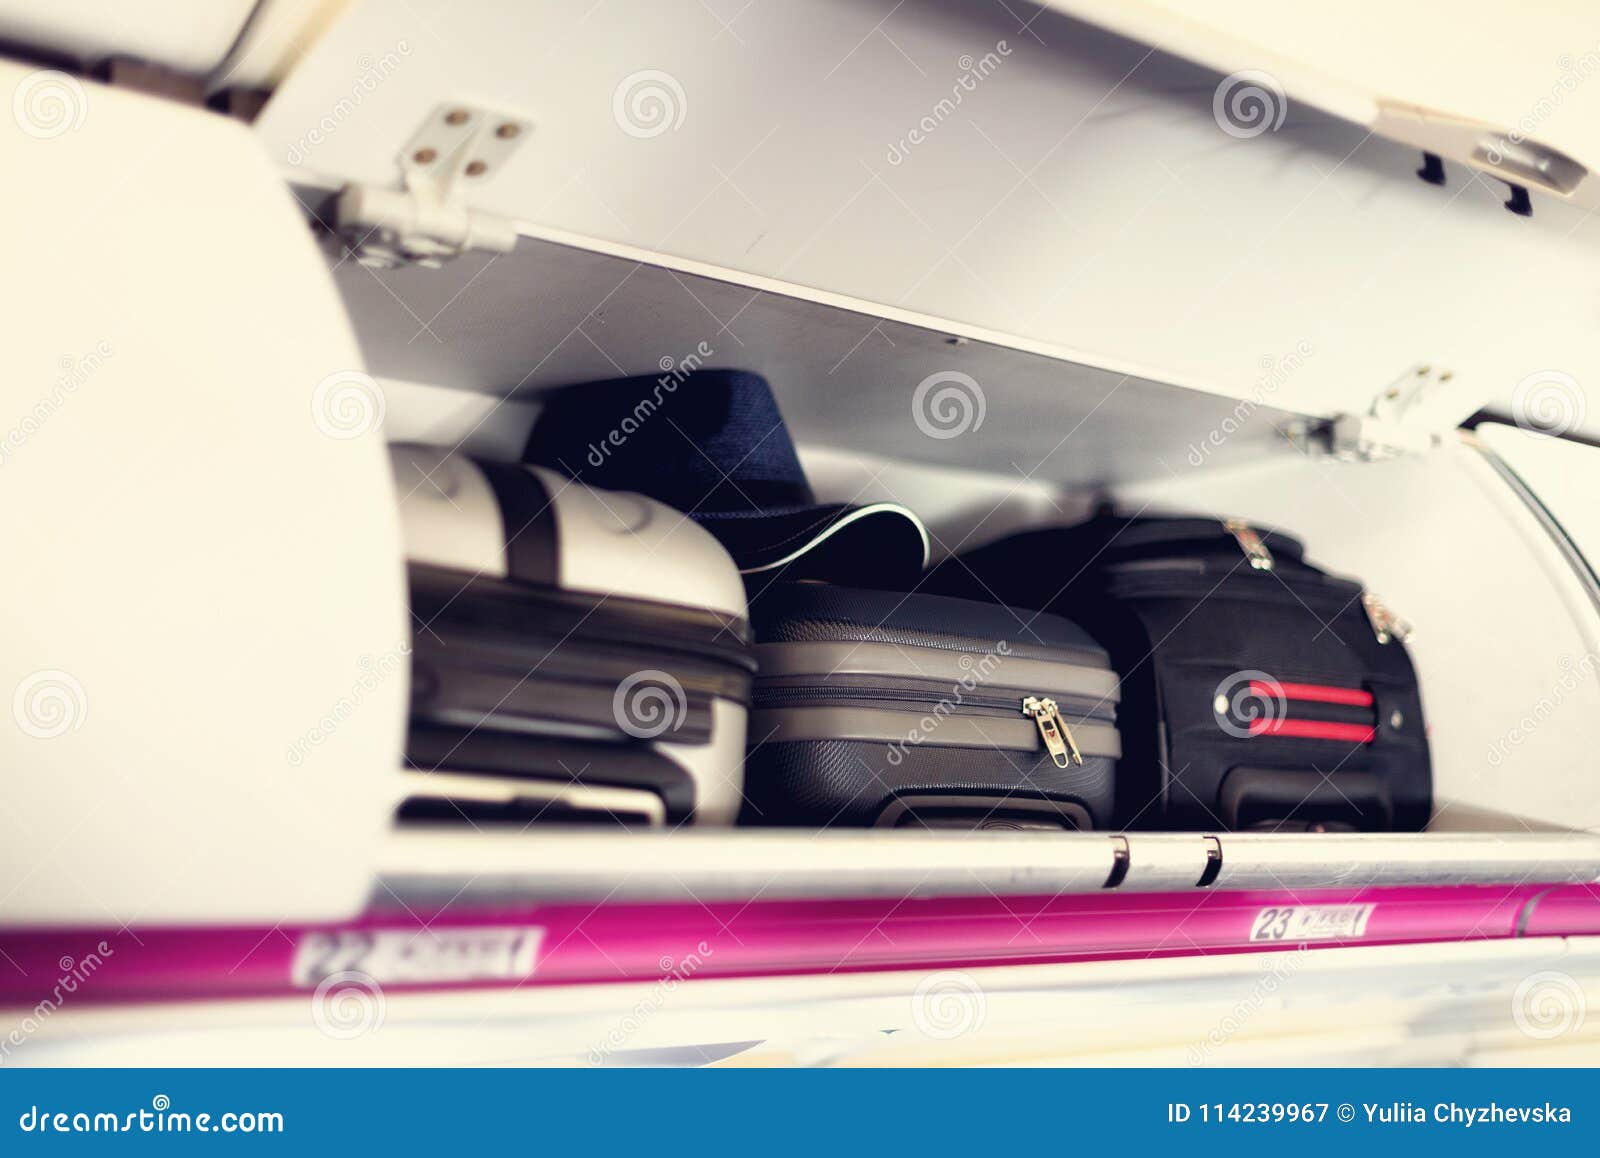 hand-luggage compartment with suitcases in airplane. carry-on luggage on top shelf of plane. travel concept with copy